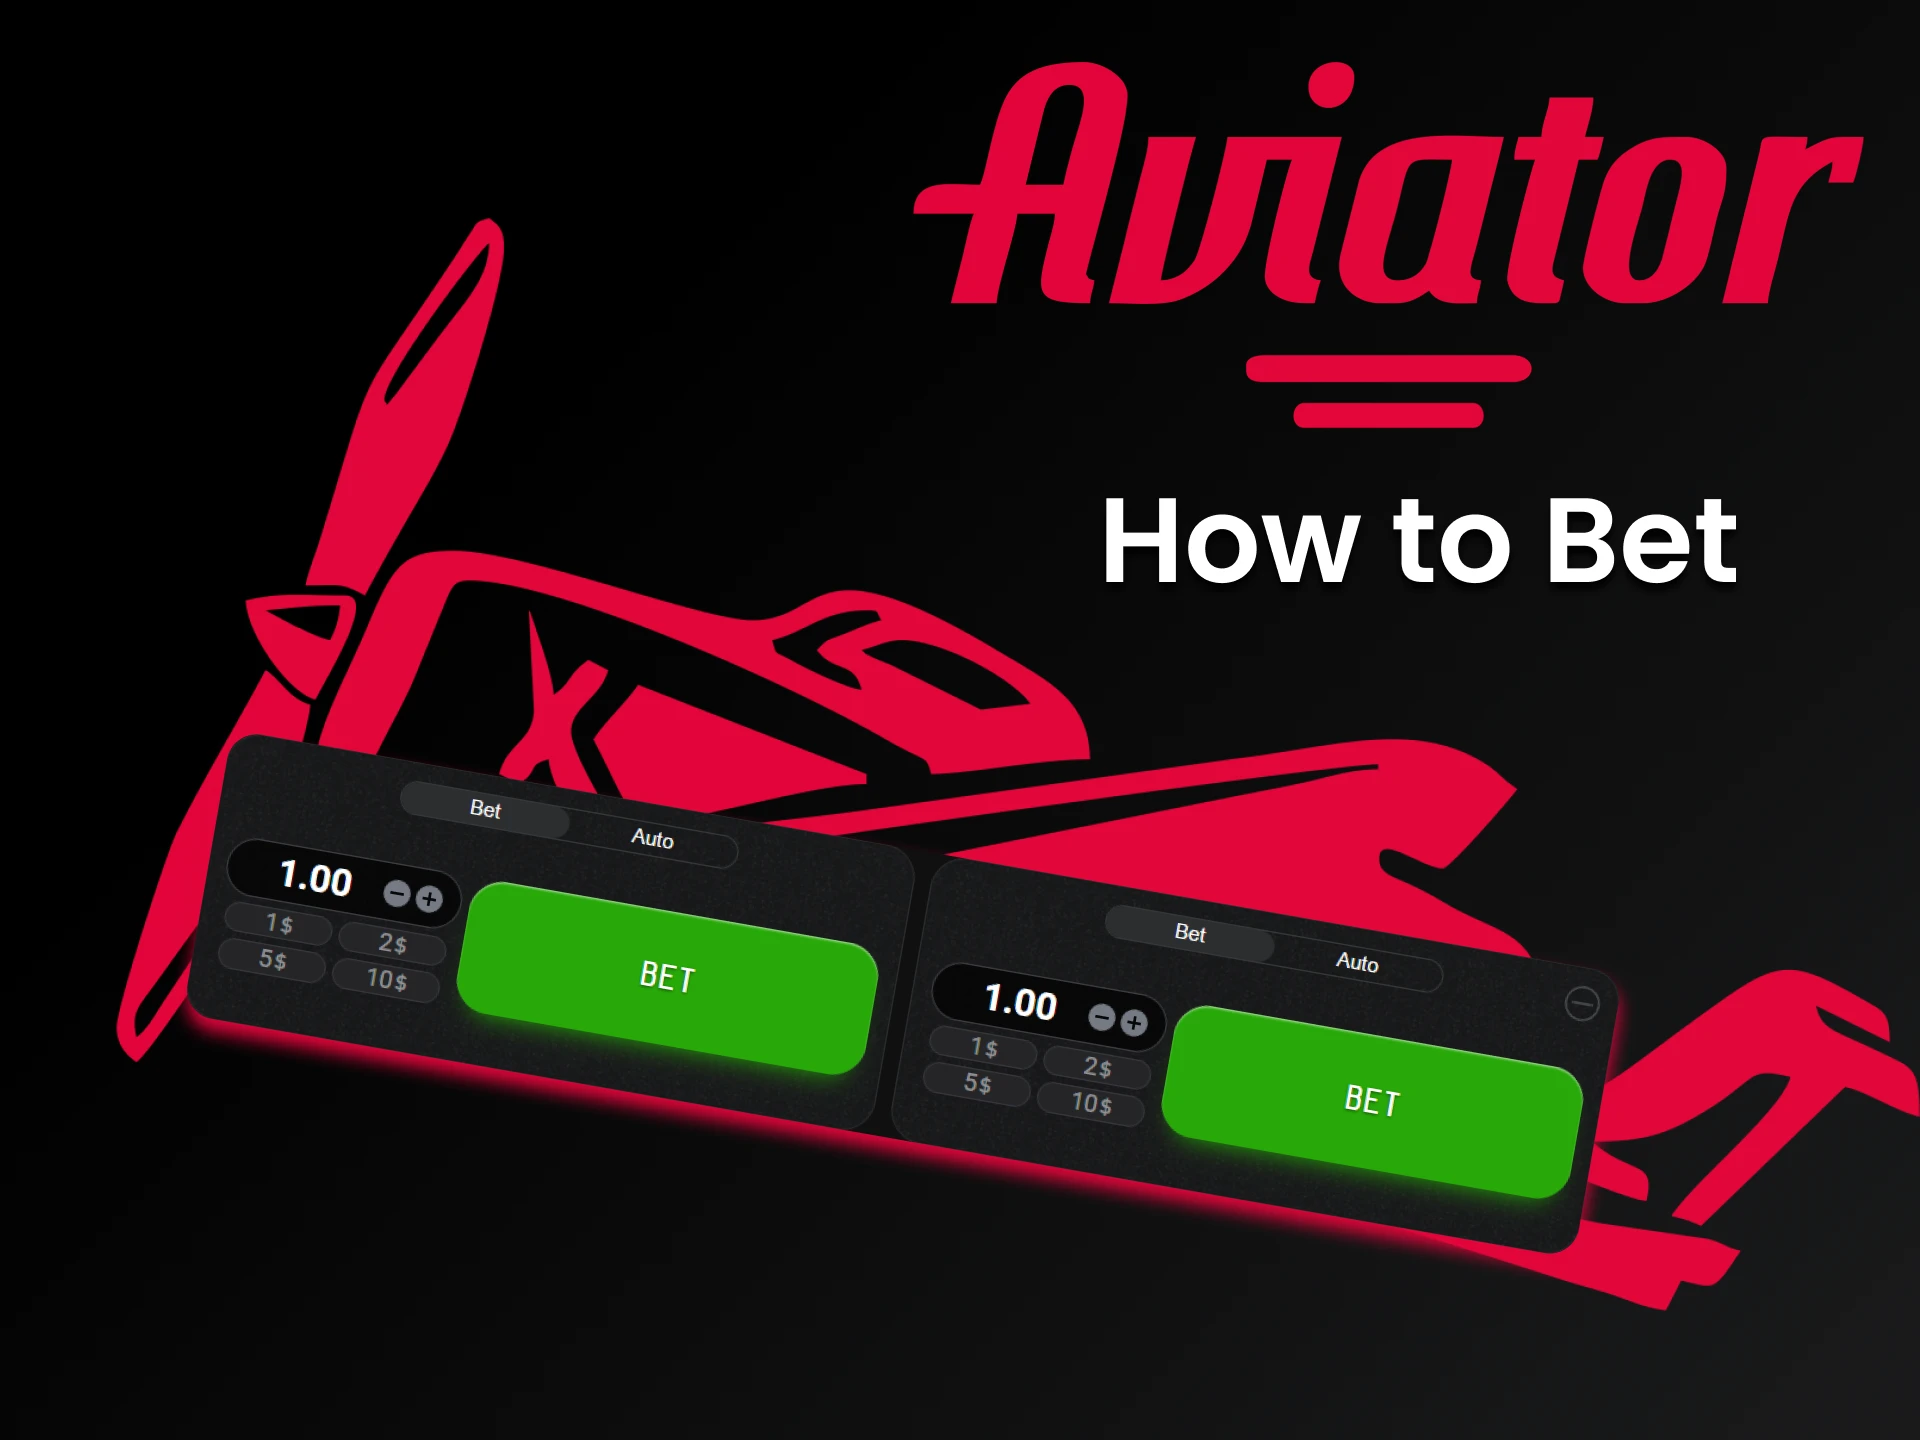 Perform several actions in the game Aviator to place bets.